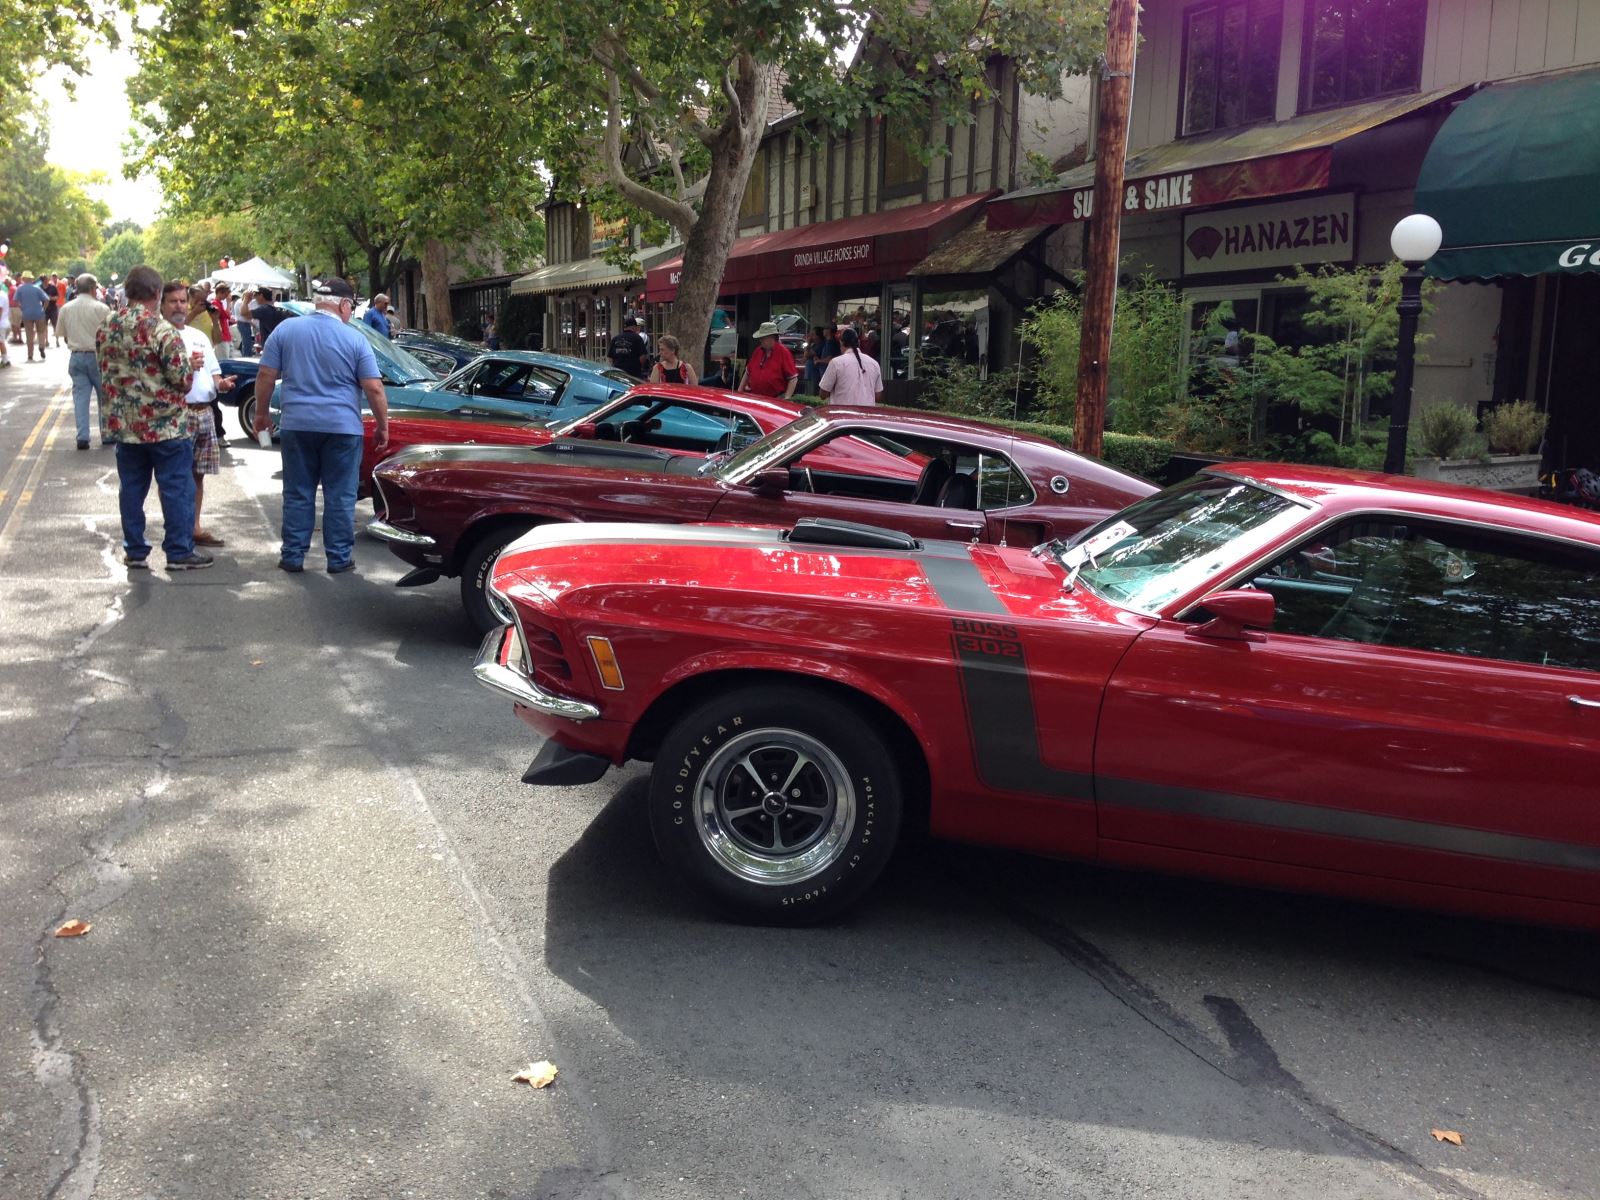 September: Join Us For The 12th Annual Orinda Classic Car Show